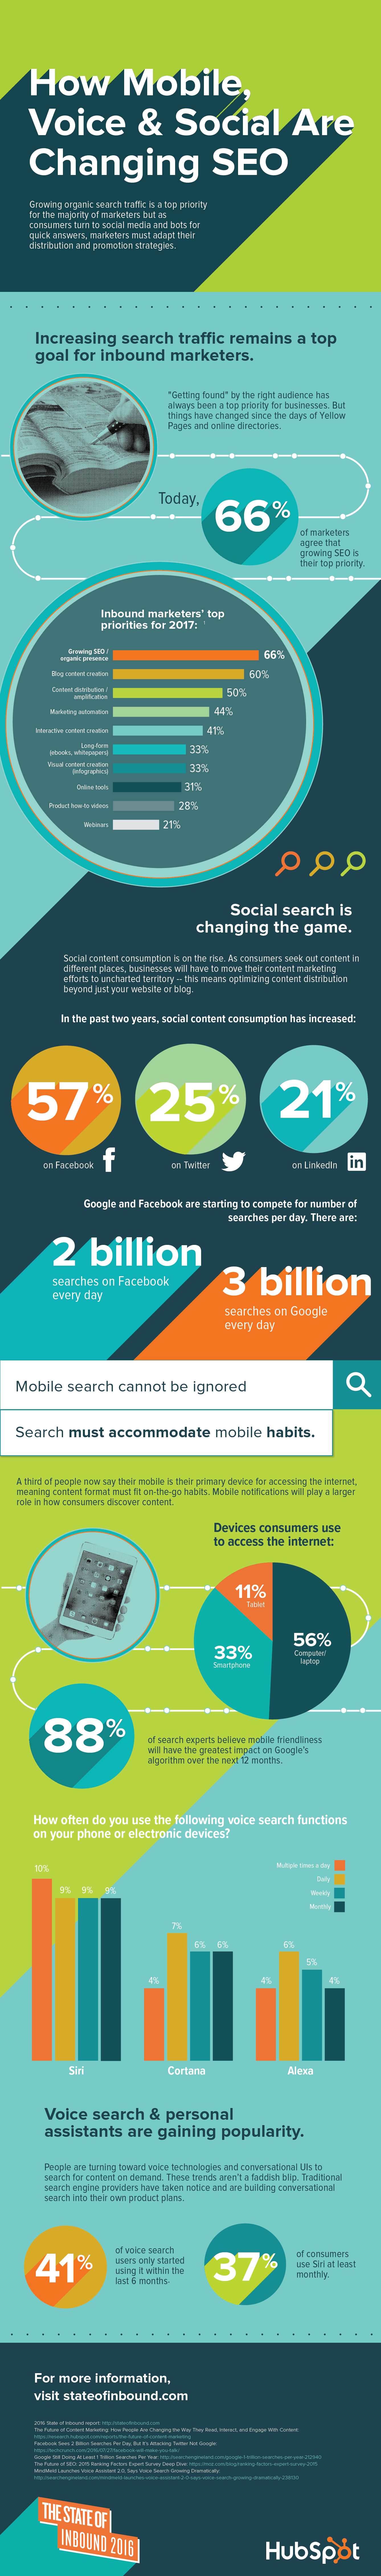 How Mobile, Voice & Social Media Are Changing SEO